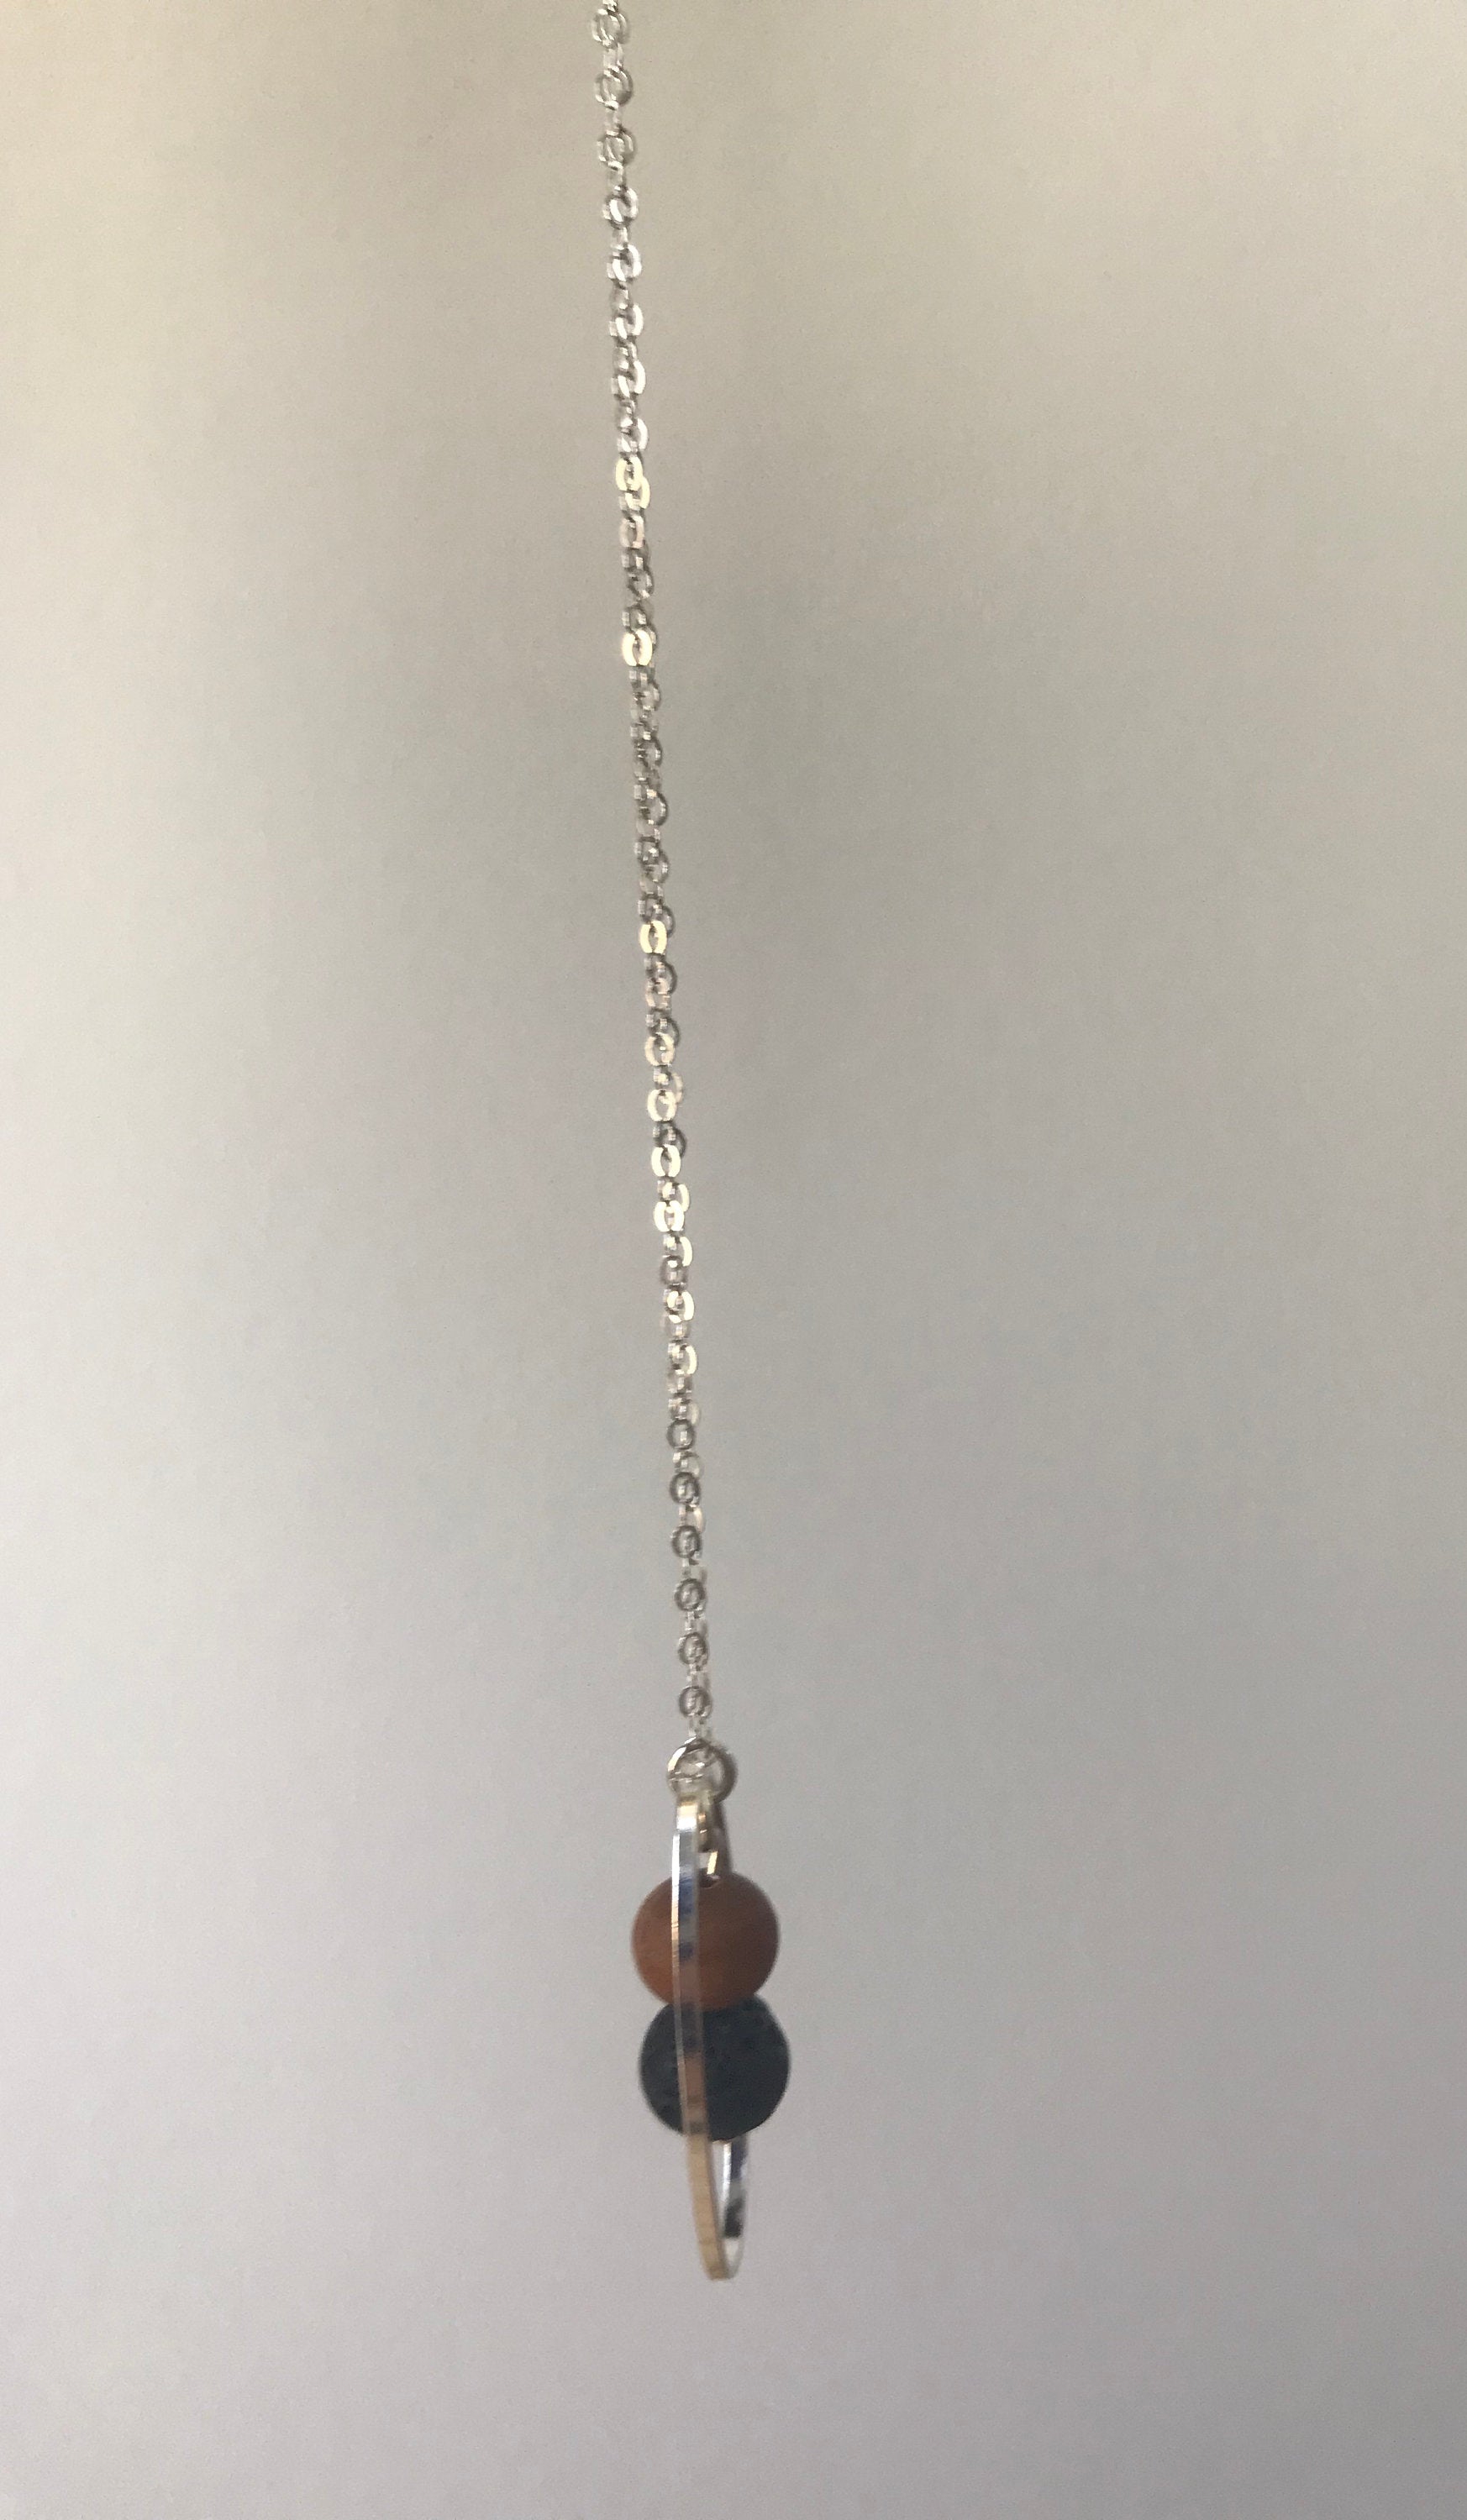 Lava and Sandalwood Diffuser Necklace with Oval Charm